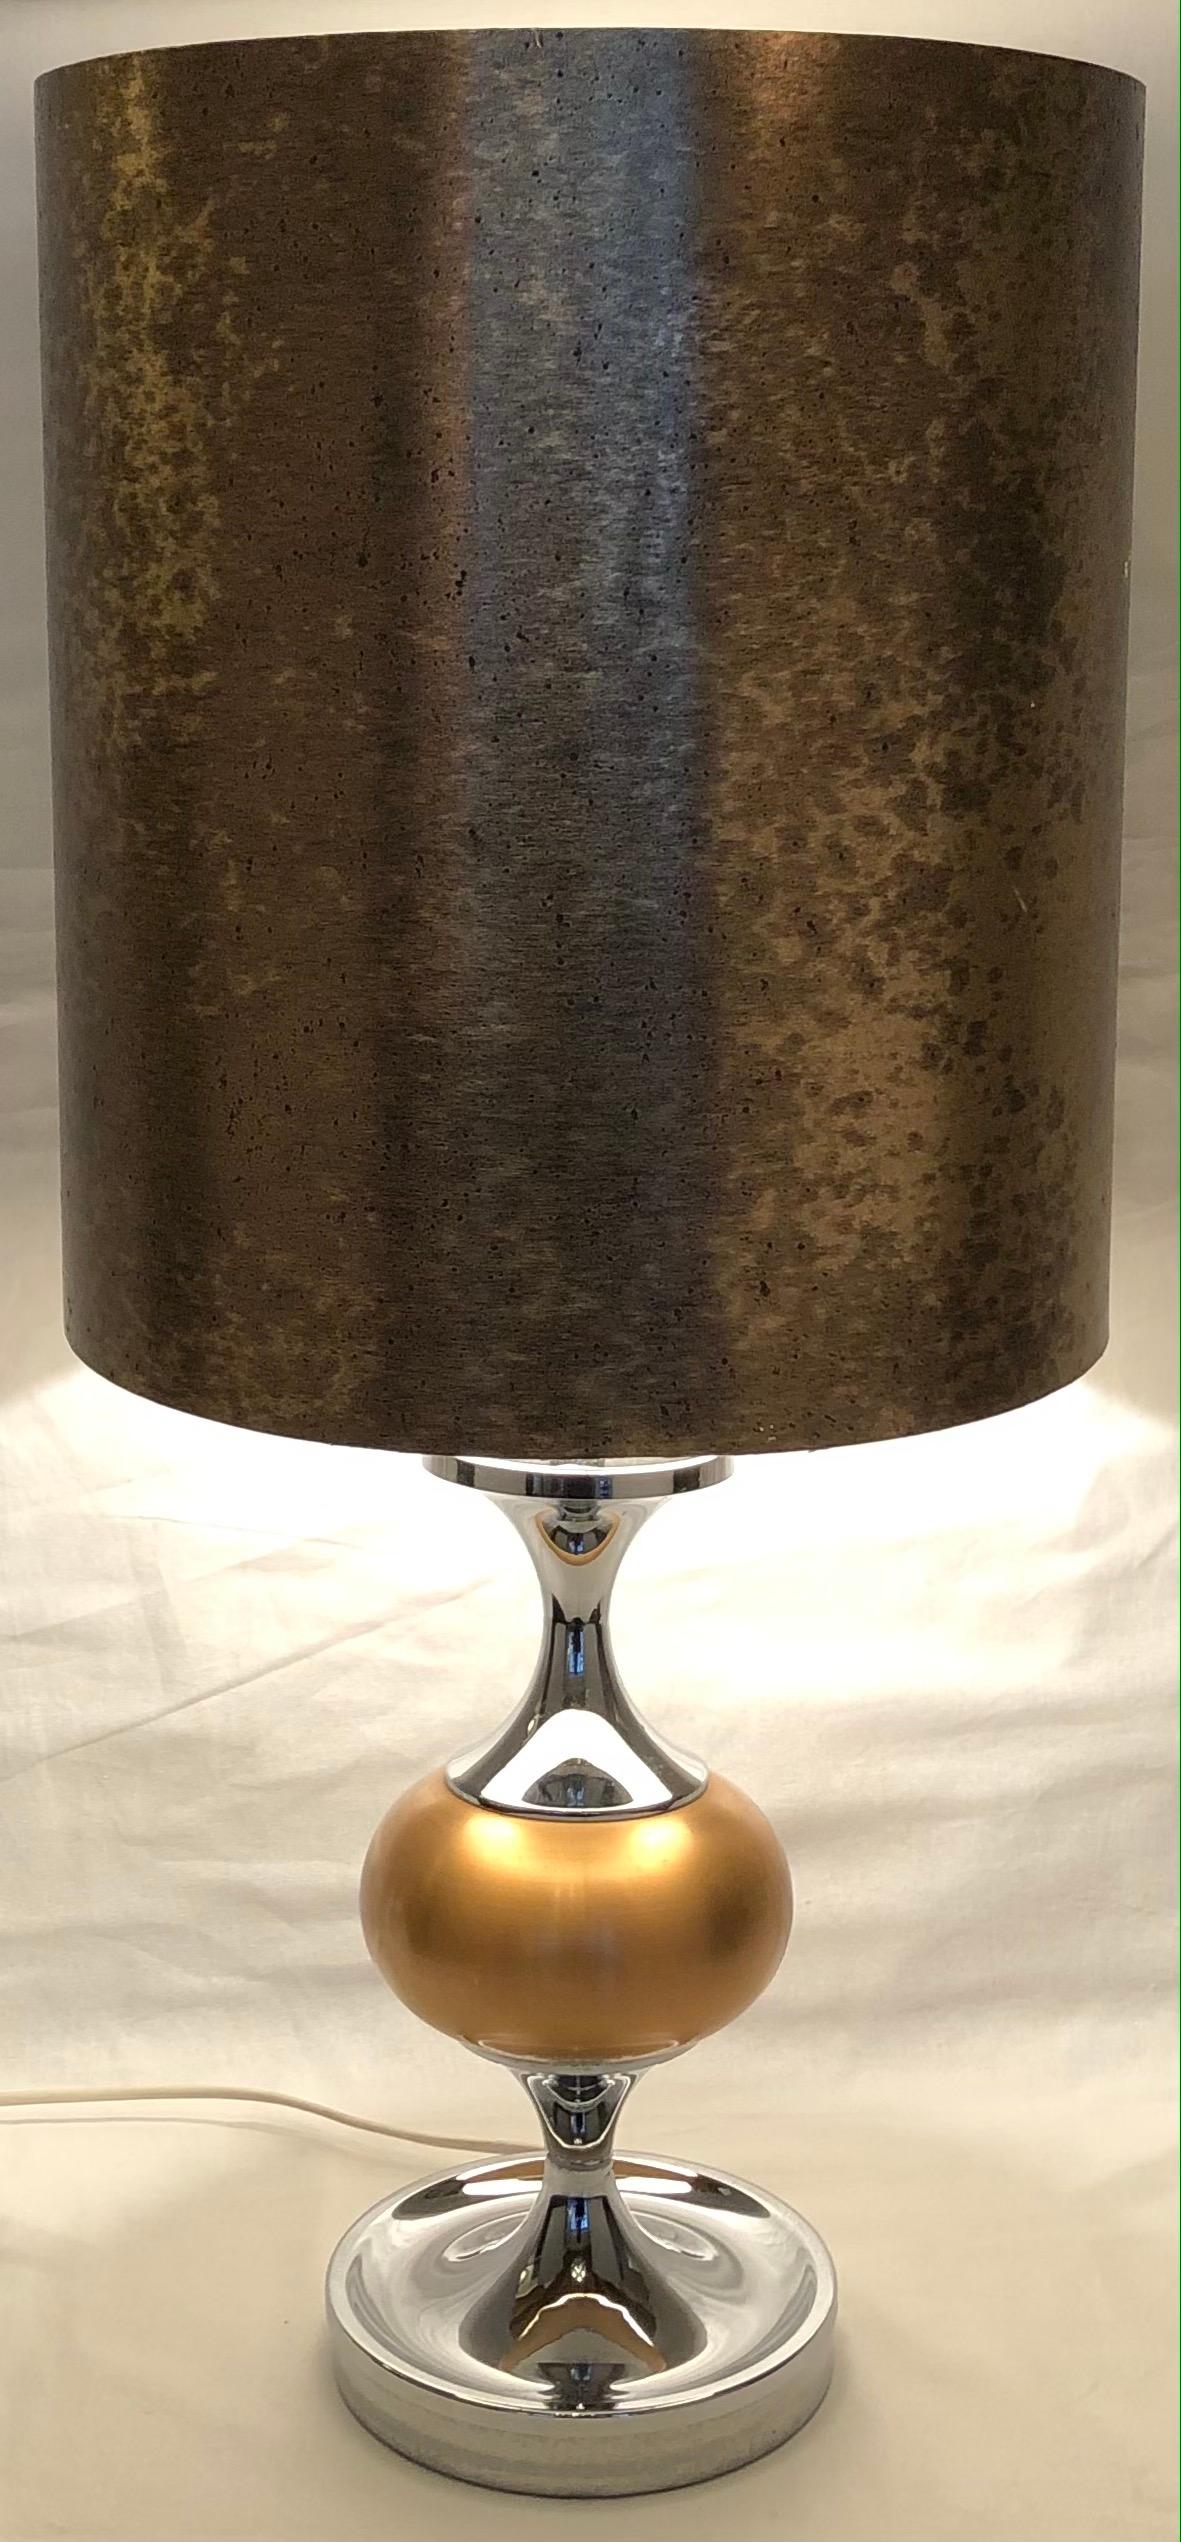 Stylish chrome table lamp designed in the spirit of Maison Jansen. Lamp features a gold shade to complement. Maison Jansen was a Paris-based interior decoration office founded in 1880 by Dutch-born Jean-Henri Jansen. 

This lamp lends itself to any